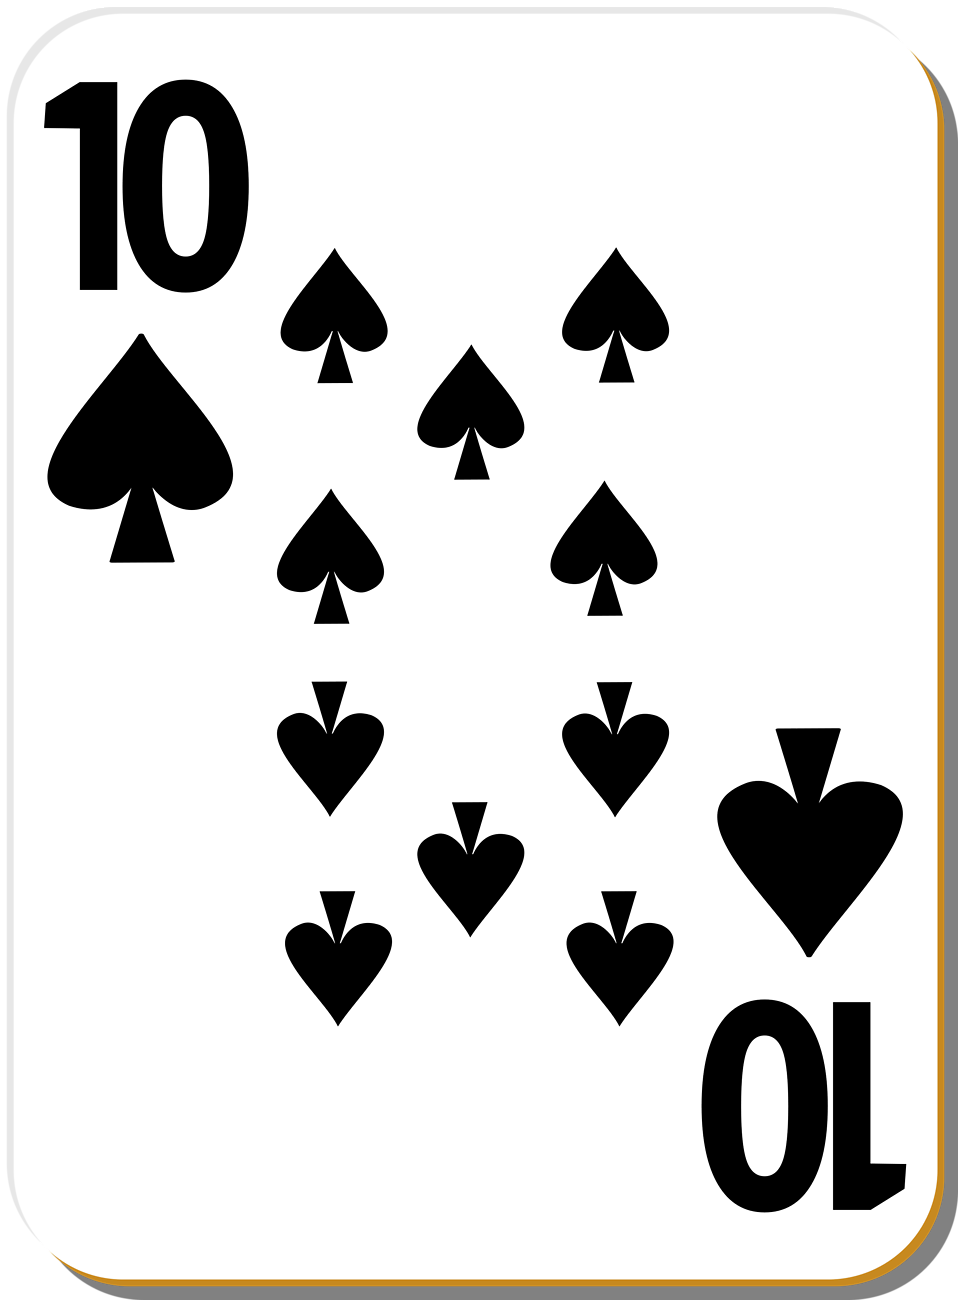 Playing Card | Free Stock Photo | Illustration of a Ten of Spades ...